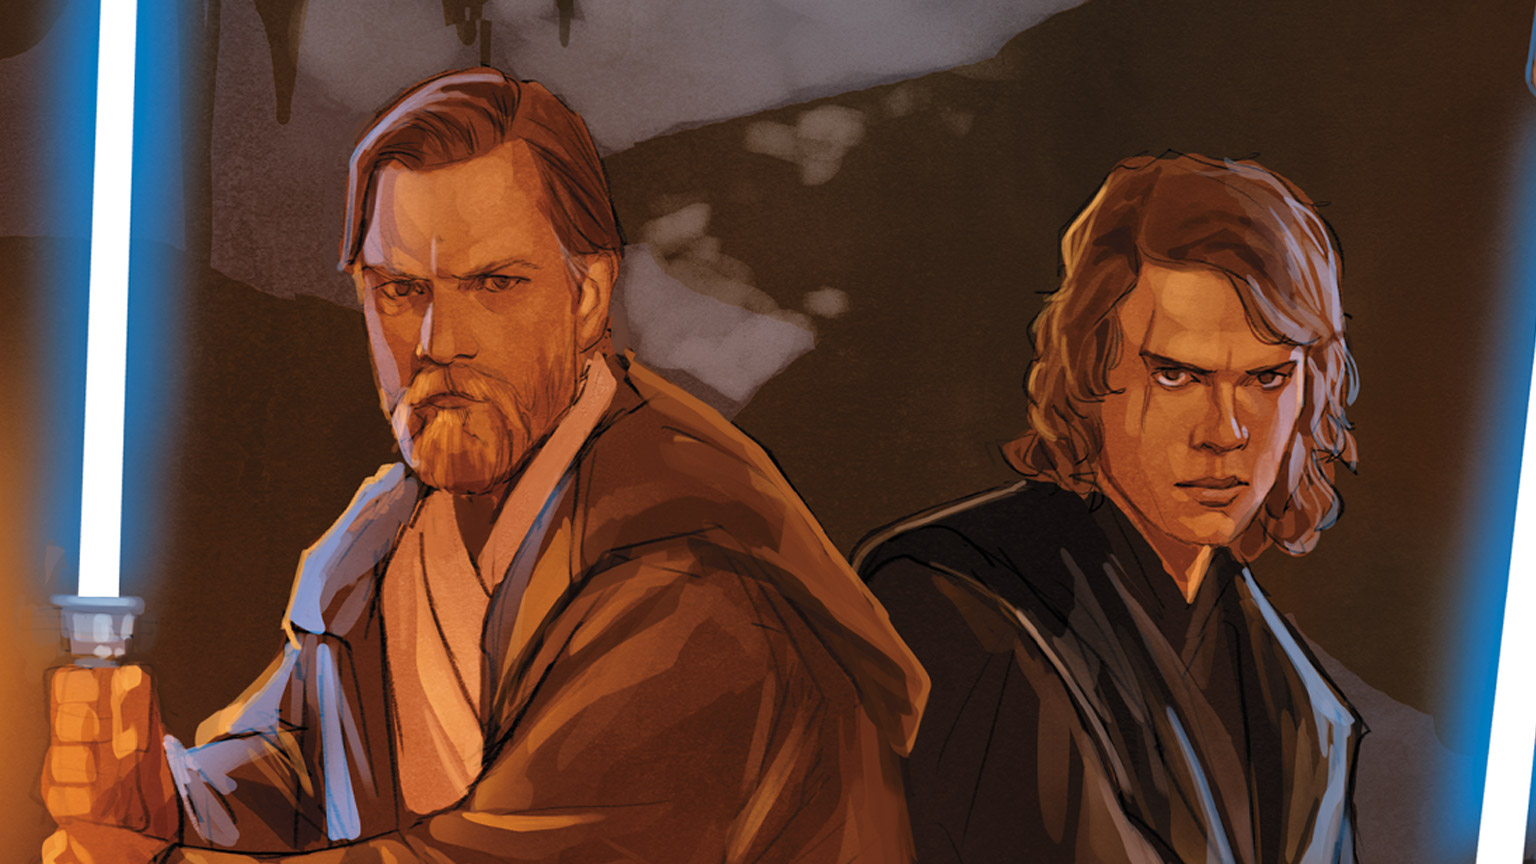 Star Wars: Obi-Wan - A Jedi's Purpose by Christopher Cantwell